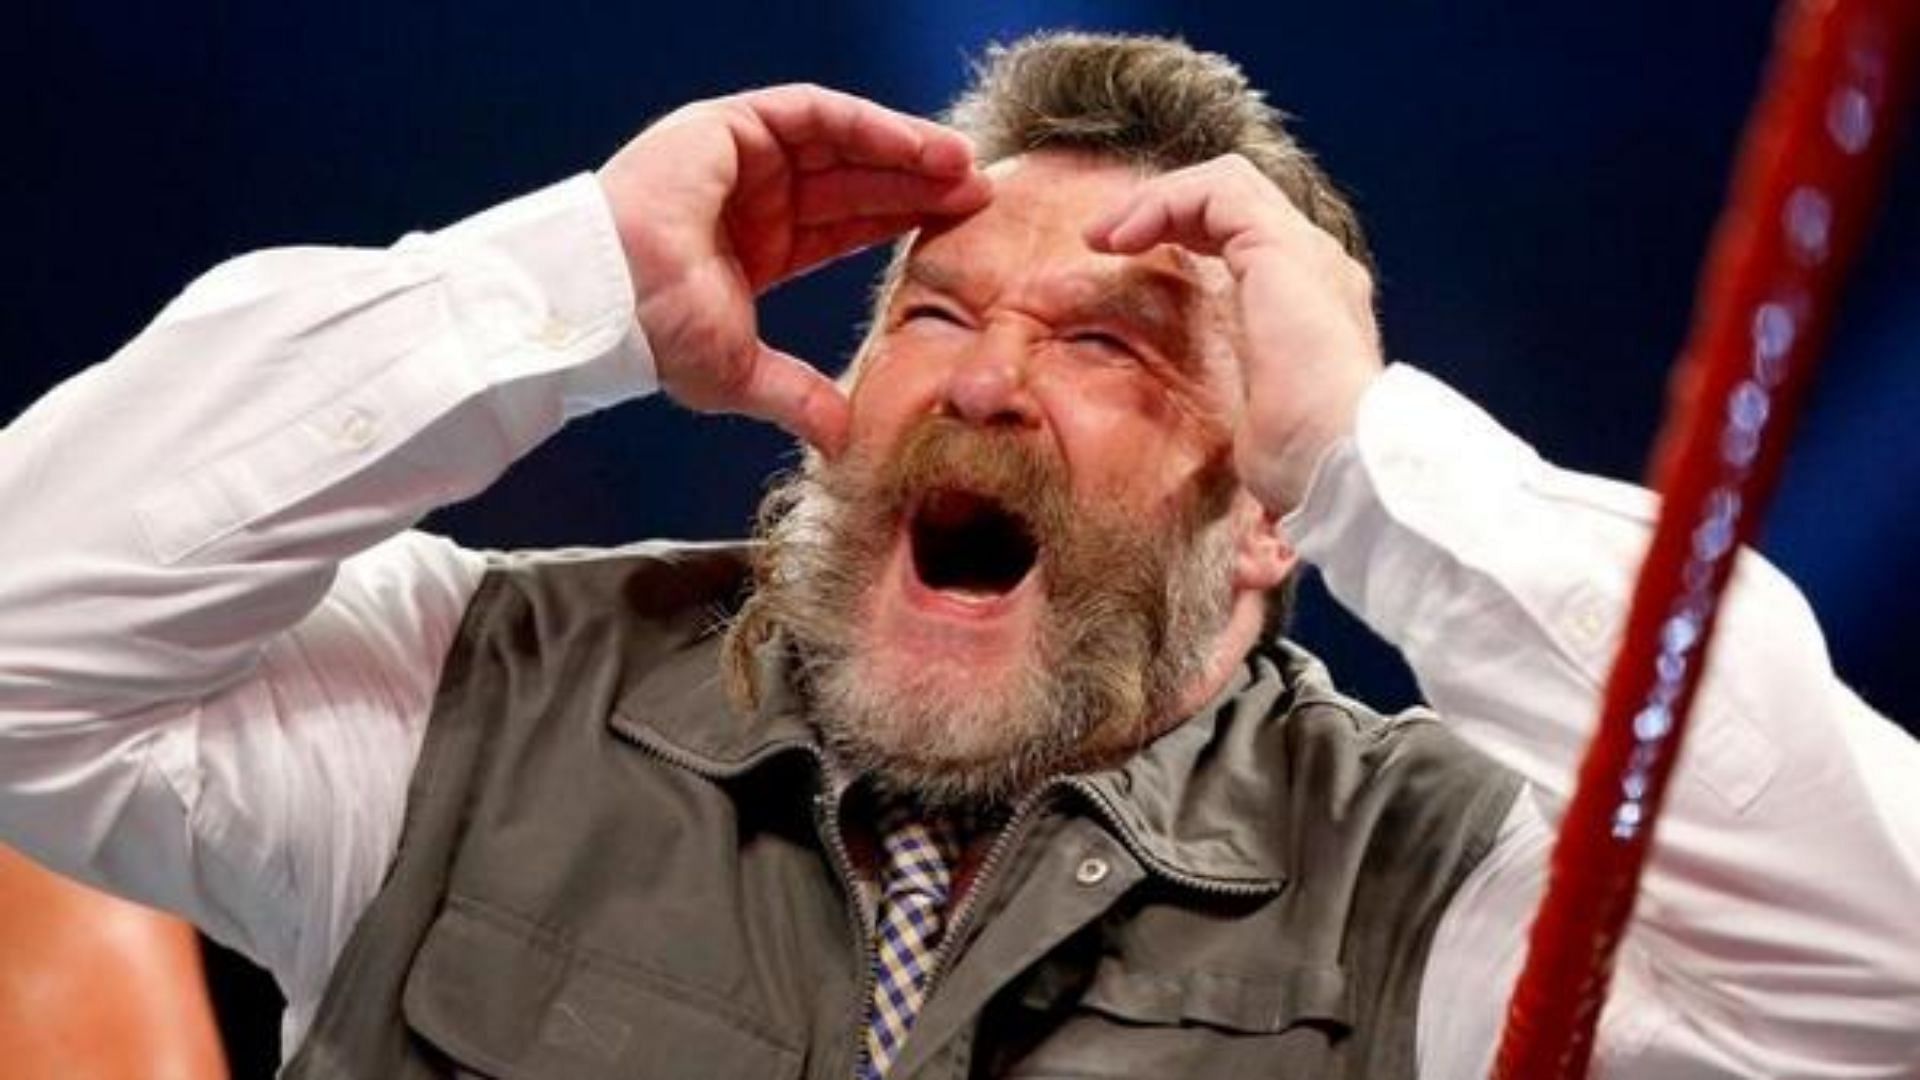 Dutch Mantell is best known to modern audiences as &quot;Zeb Colter.&quot;